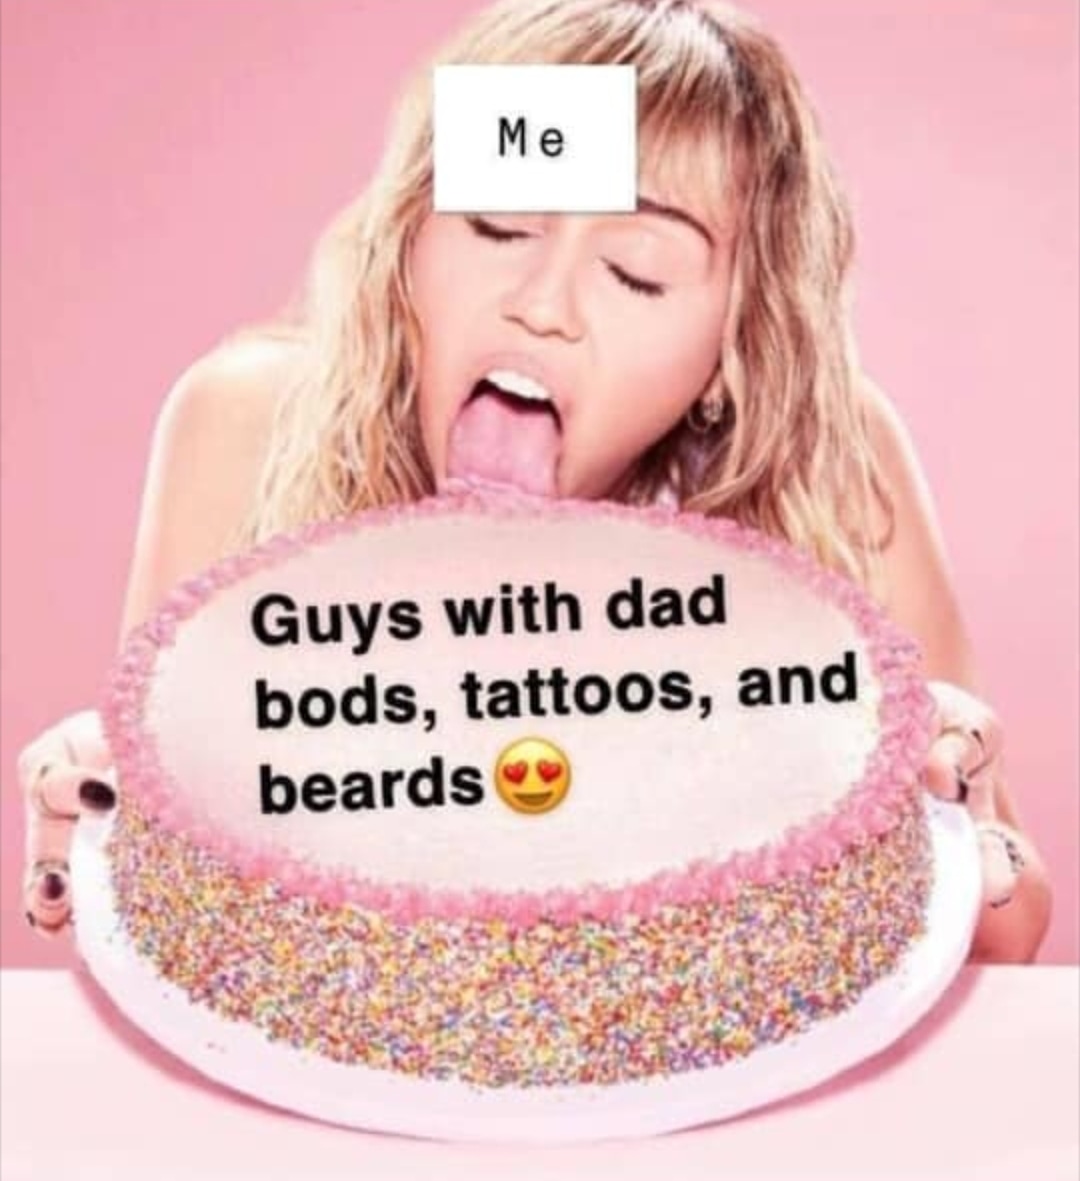 miley cyrus cake meme template - Me Guys with dad bods, tattoos, and beards